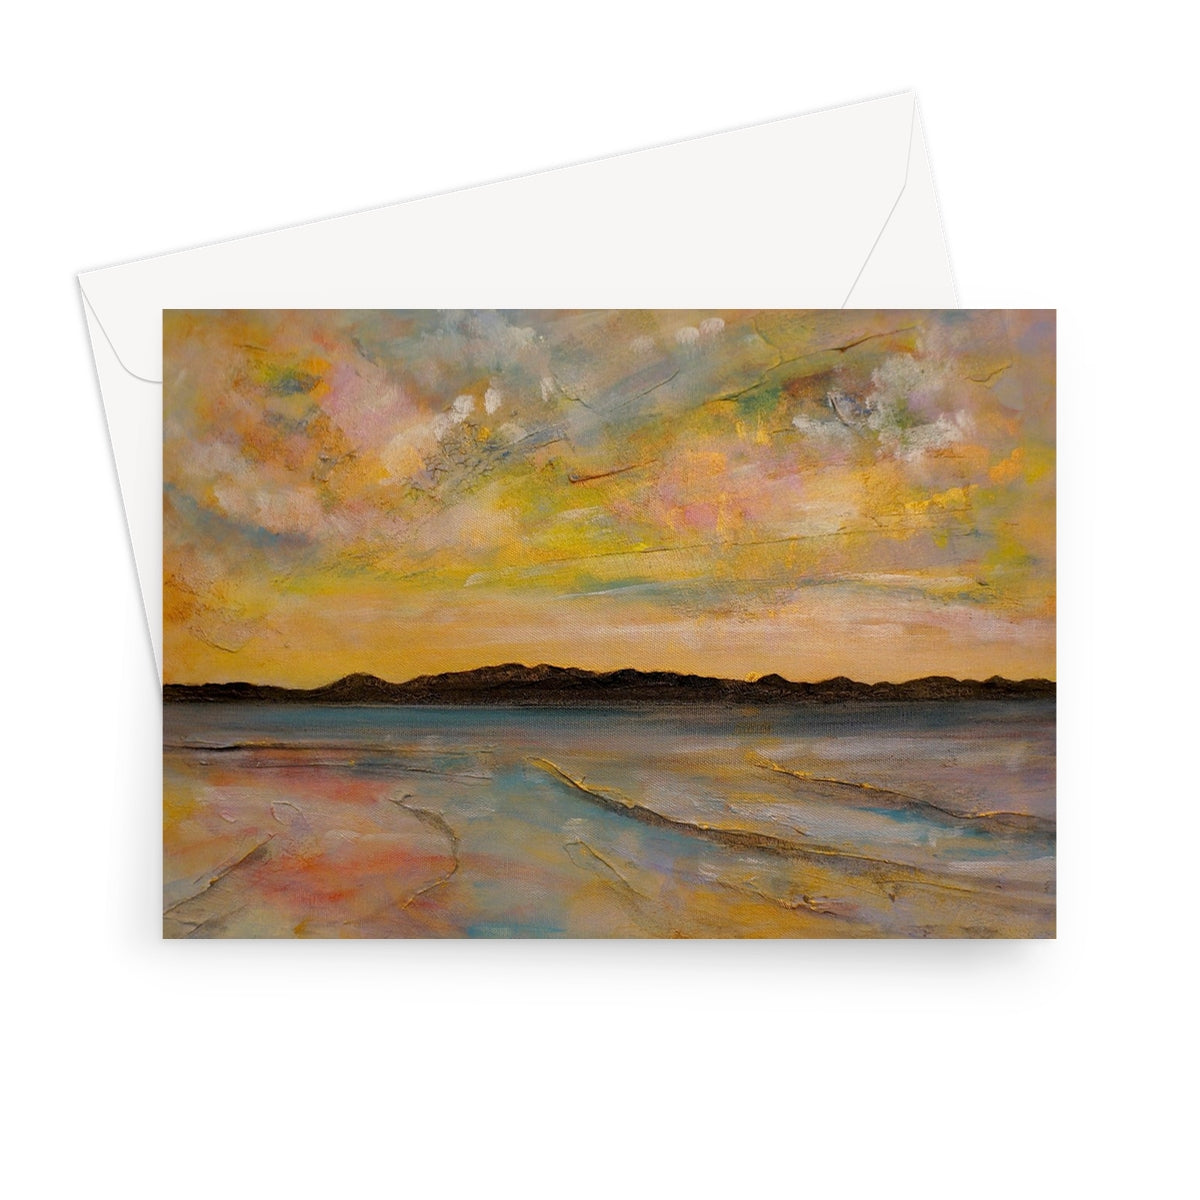 Vallay Island North Uist Art Gifts Greeting Card-Greetings Cards-Hebridean Islands Art Gallery-7"x5"-1 Card-Paintings, Prints, Homeware, Art Gifts From Scotland By Scottish Artist Kevin Hunter